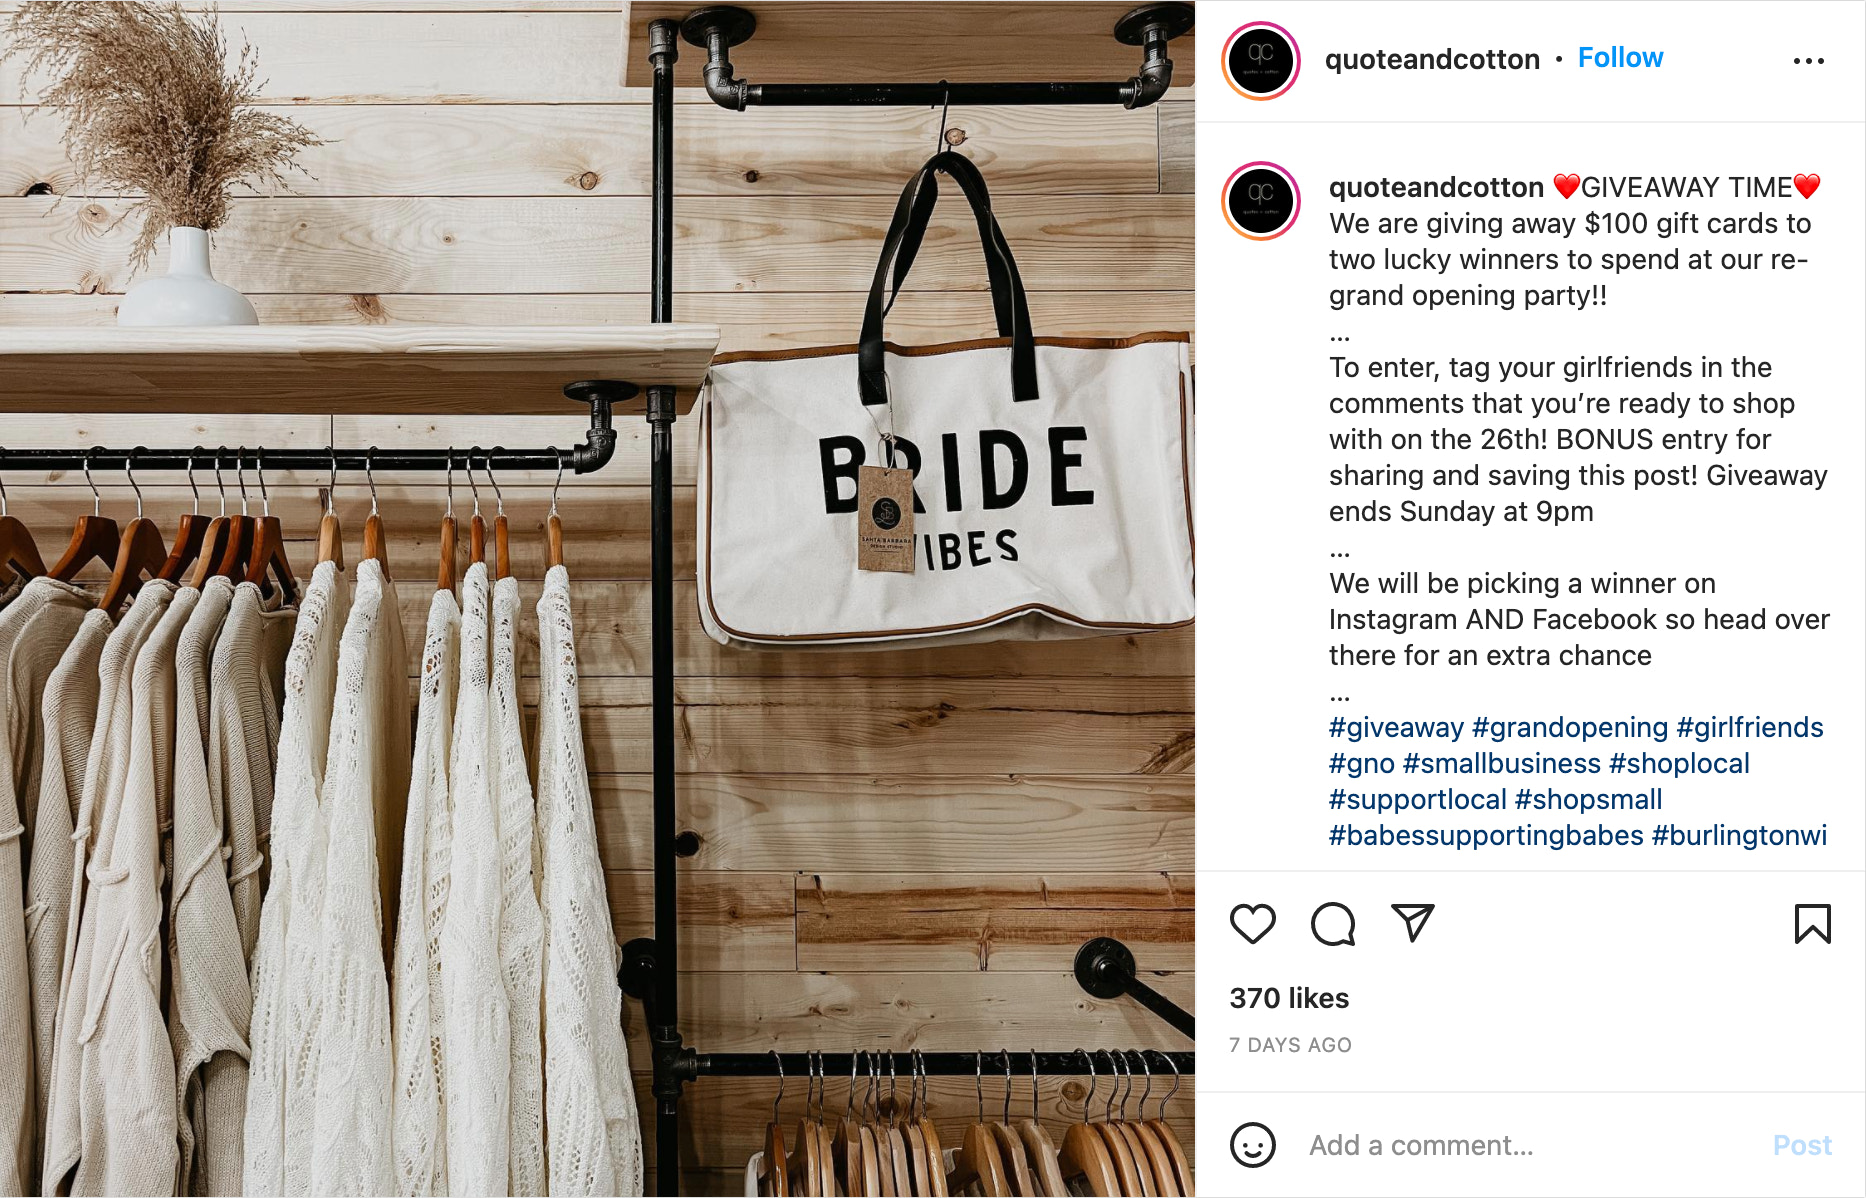 Instagram post by Quote & Cotton advertising the store's grand reopening content